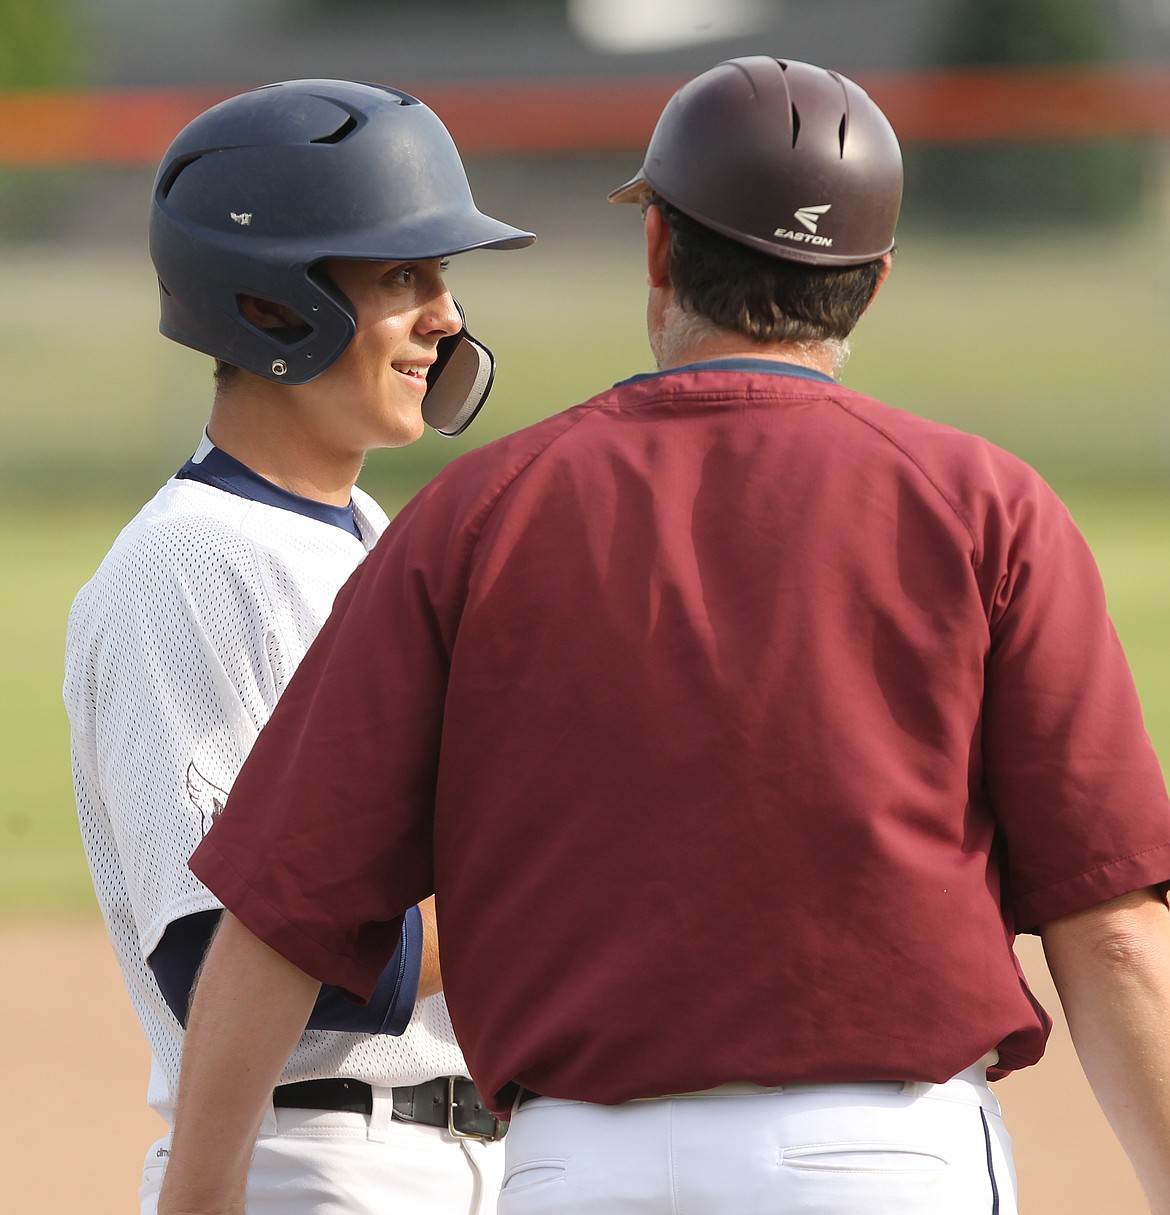 Harrison Reid of Prairie smiles as he chats with coach Pat Call after reaching third base.